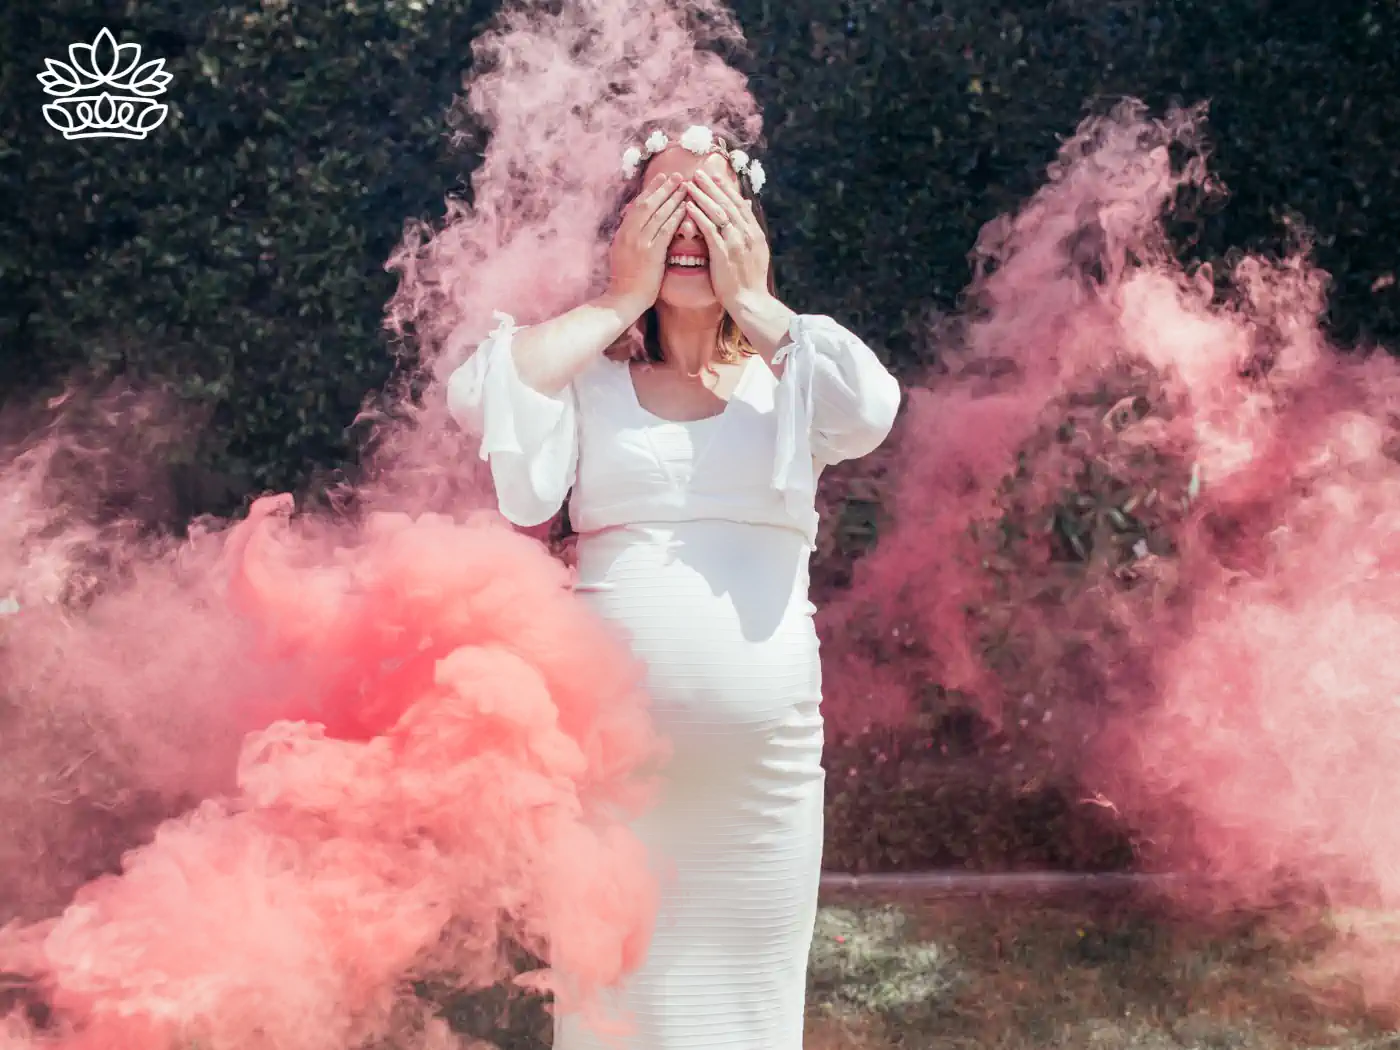 Pregnant woman in white dress with pink smoke in a gender reveal party - Fabulous Flowers and Gifts.